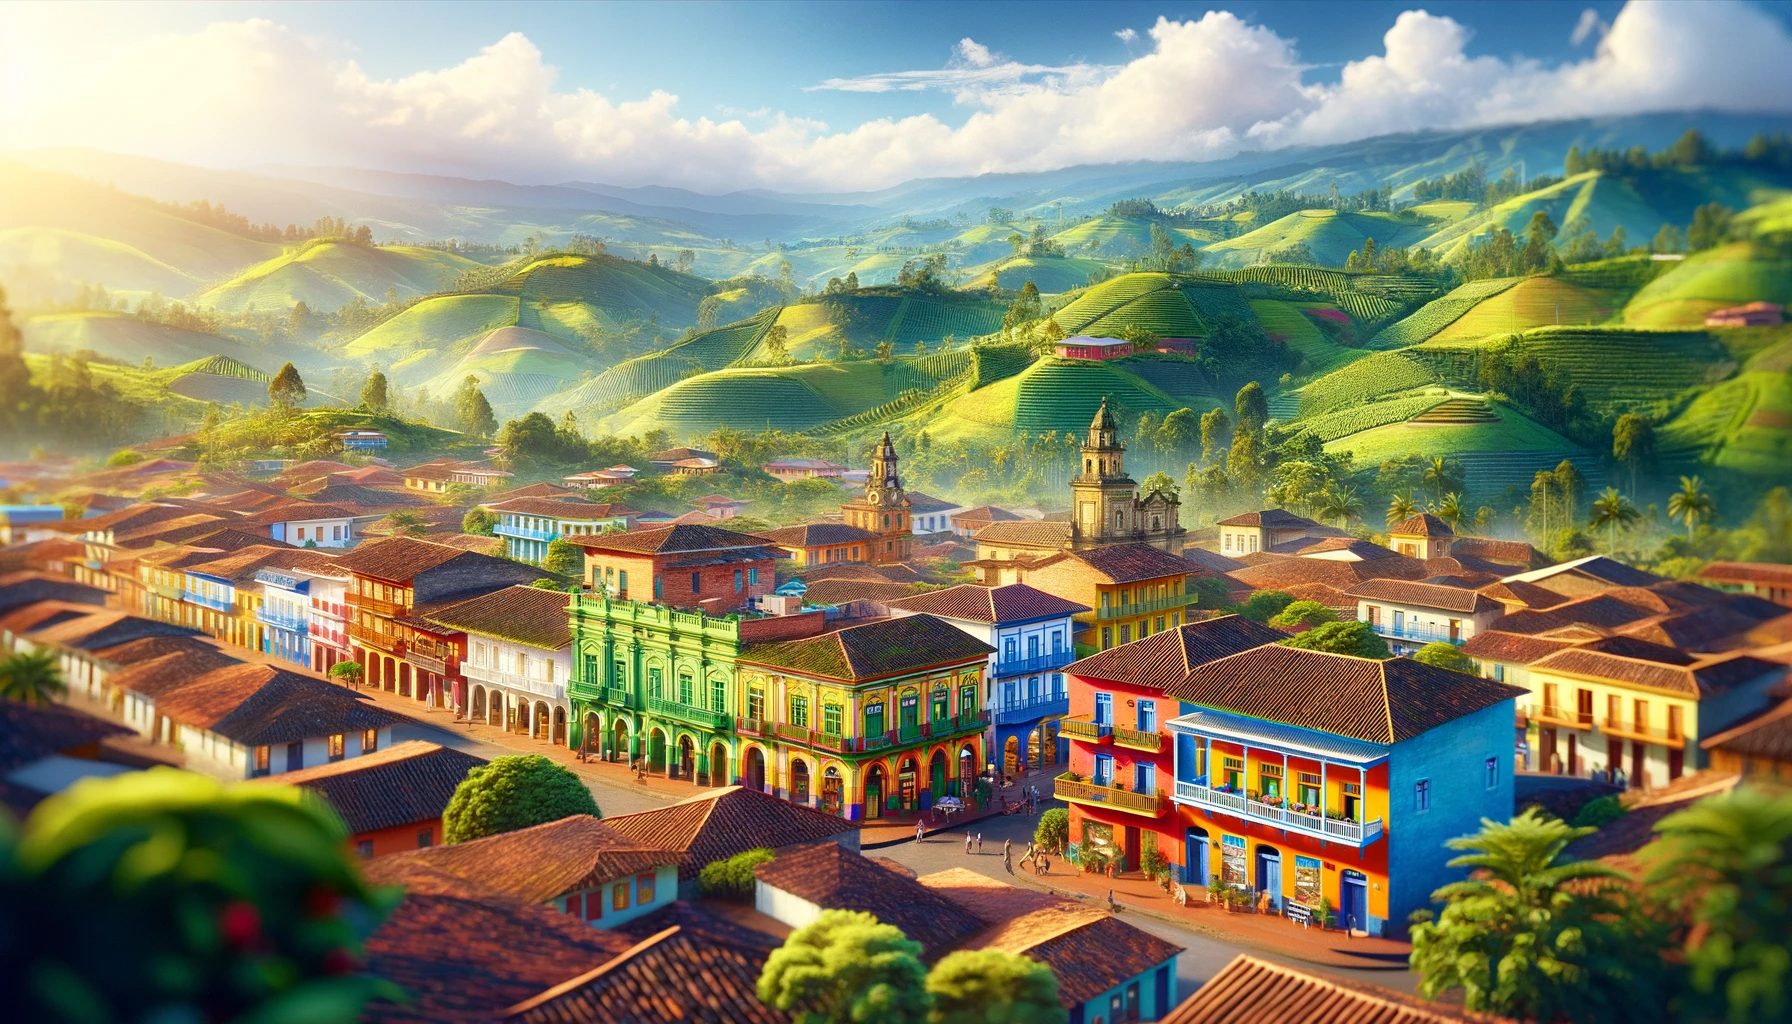 Colorful colonial town with surrounding green hills.